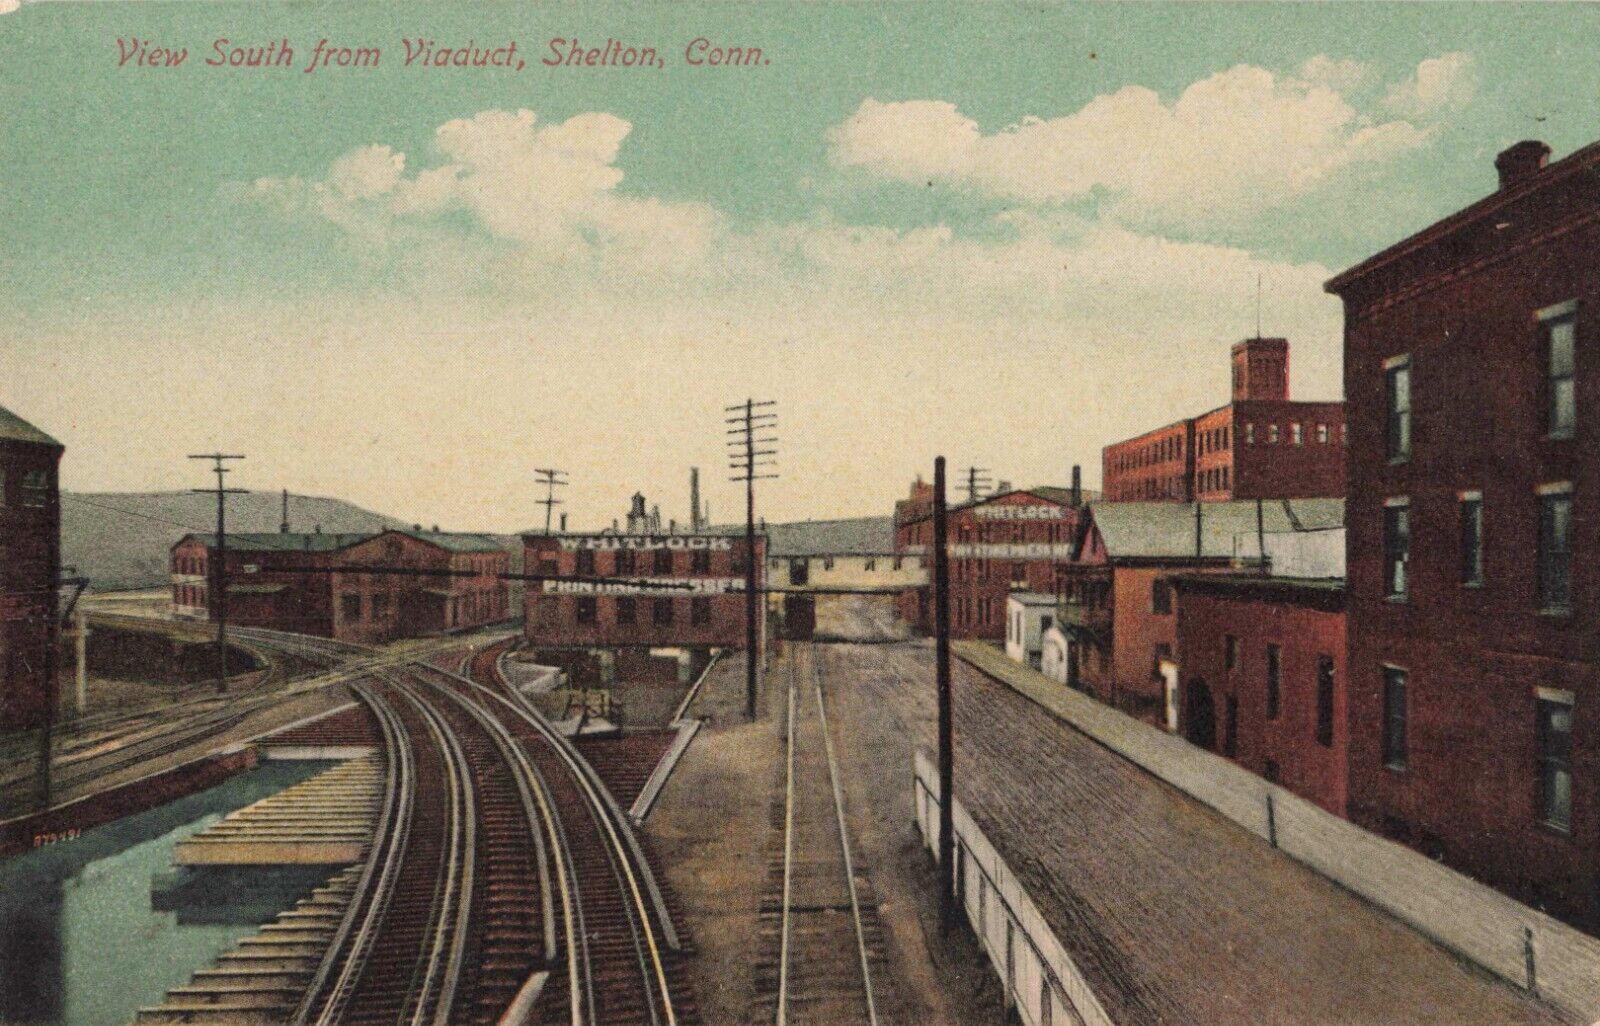 View South from Viaduct Shelton Connecticut CT Railroad Tracks c1910 Postcard